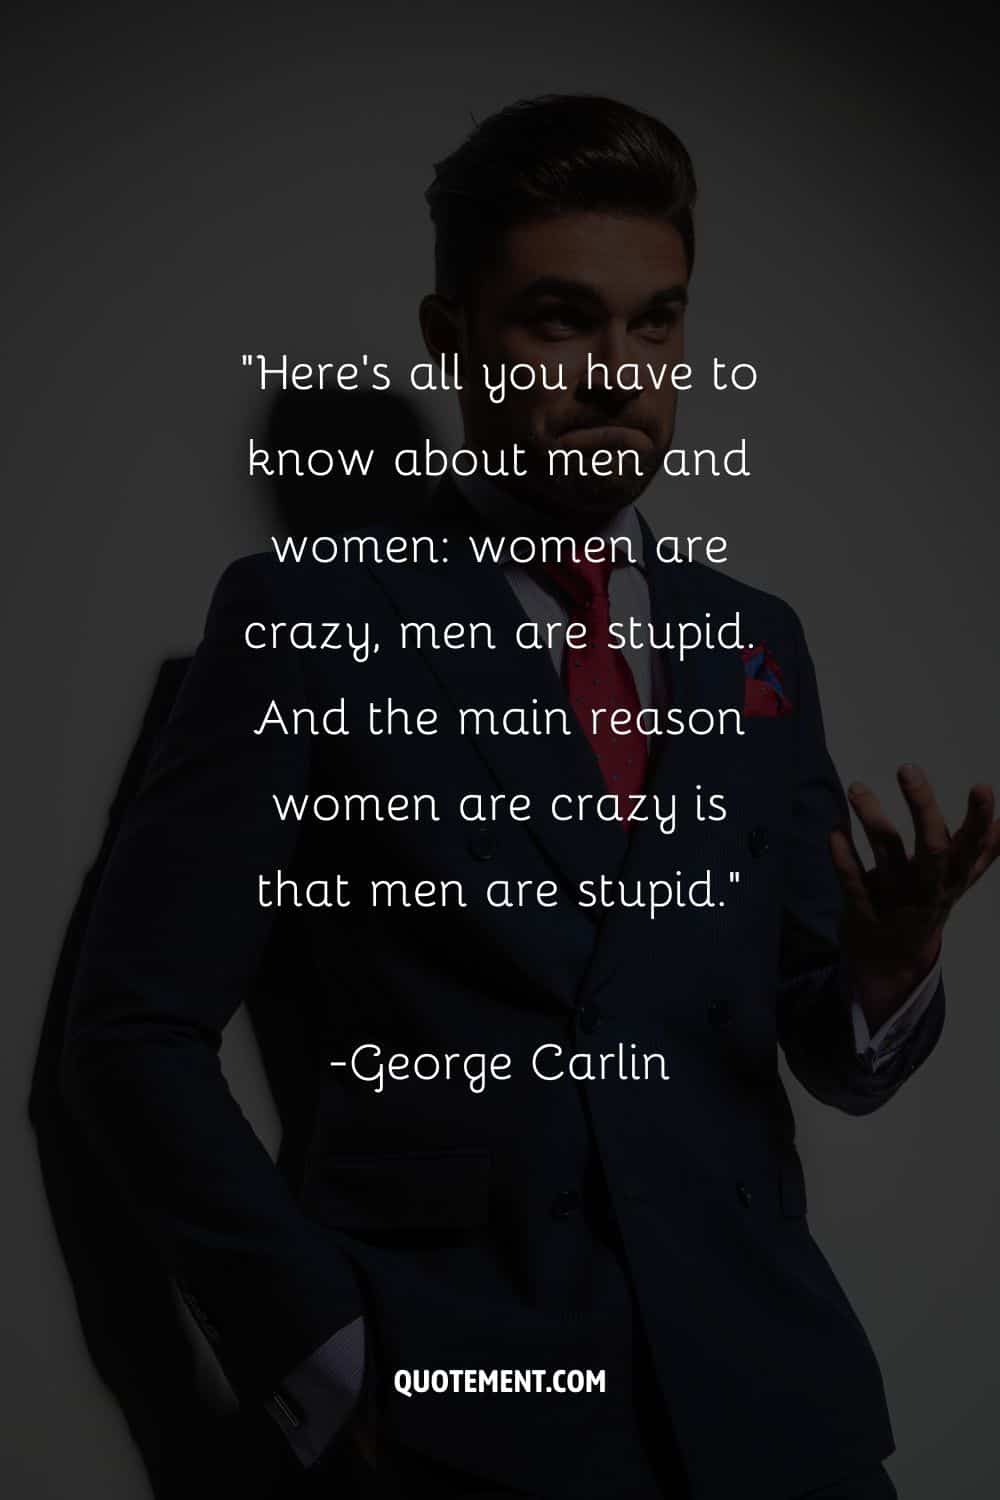 “Here's all you have to know about men and women women are crazy, men are stupid. And the main reason women are crazy is that men are stupid.”